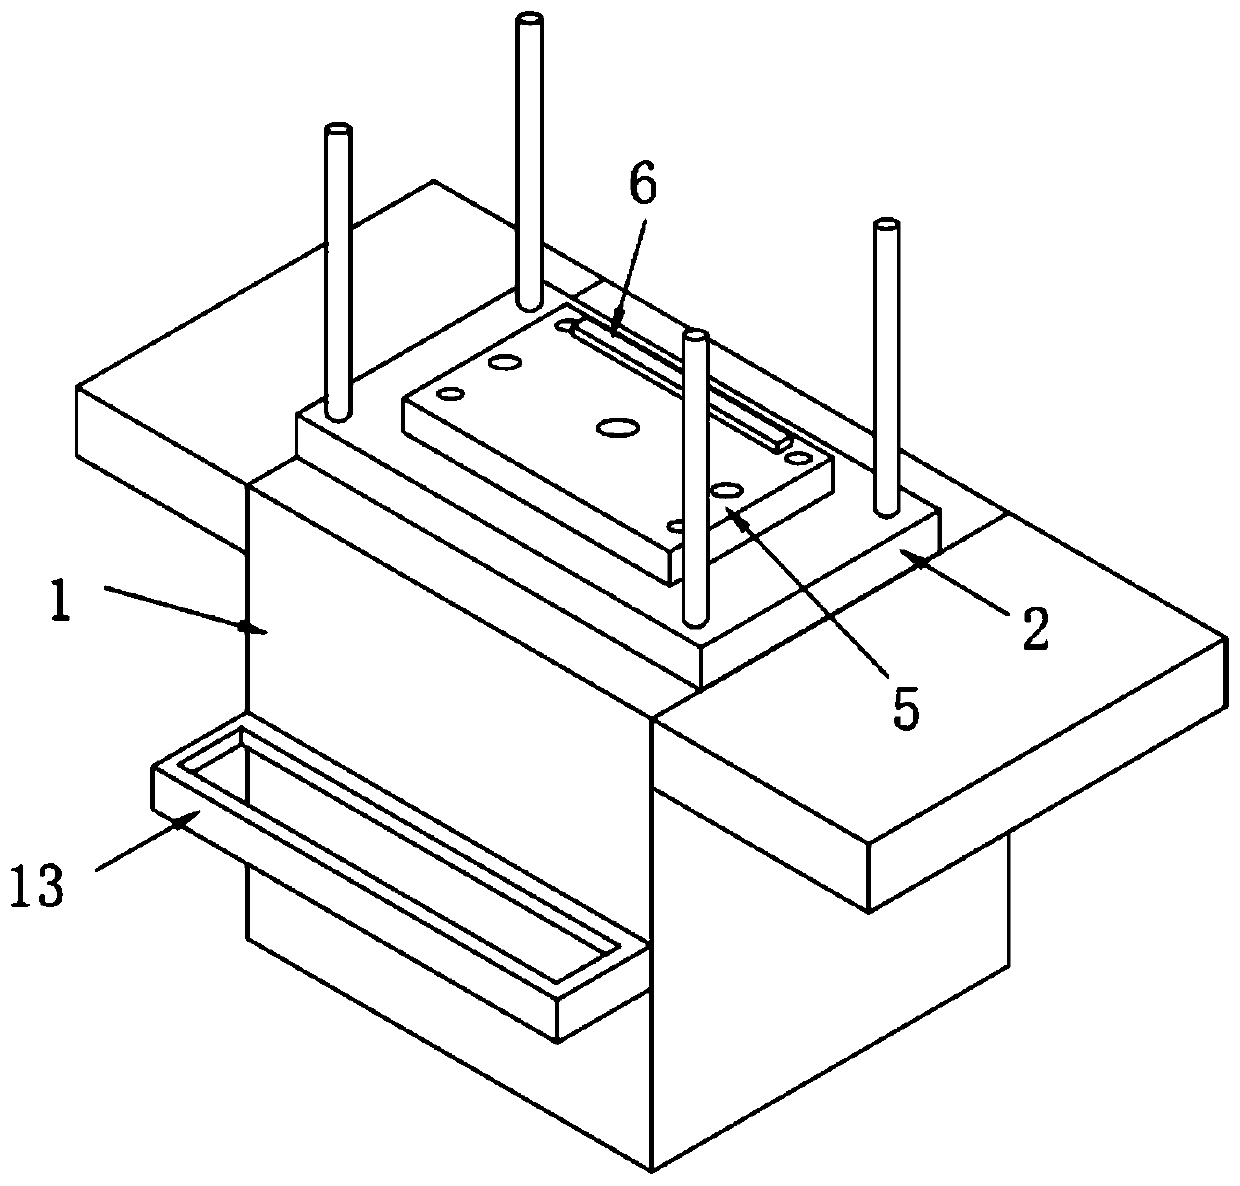 Stamping die with auxiliary feeding mechanism